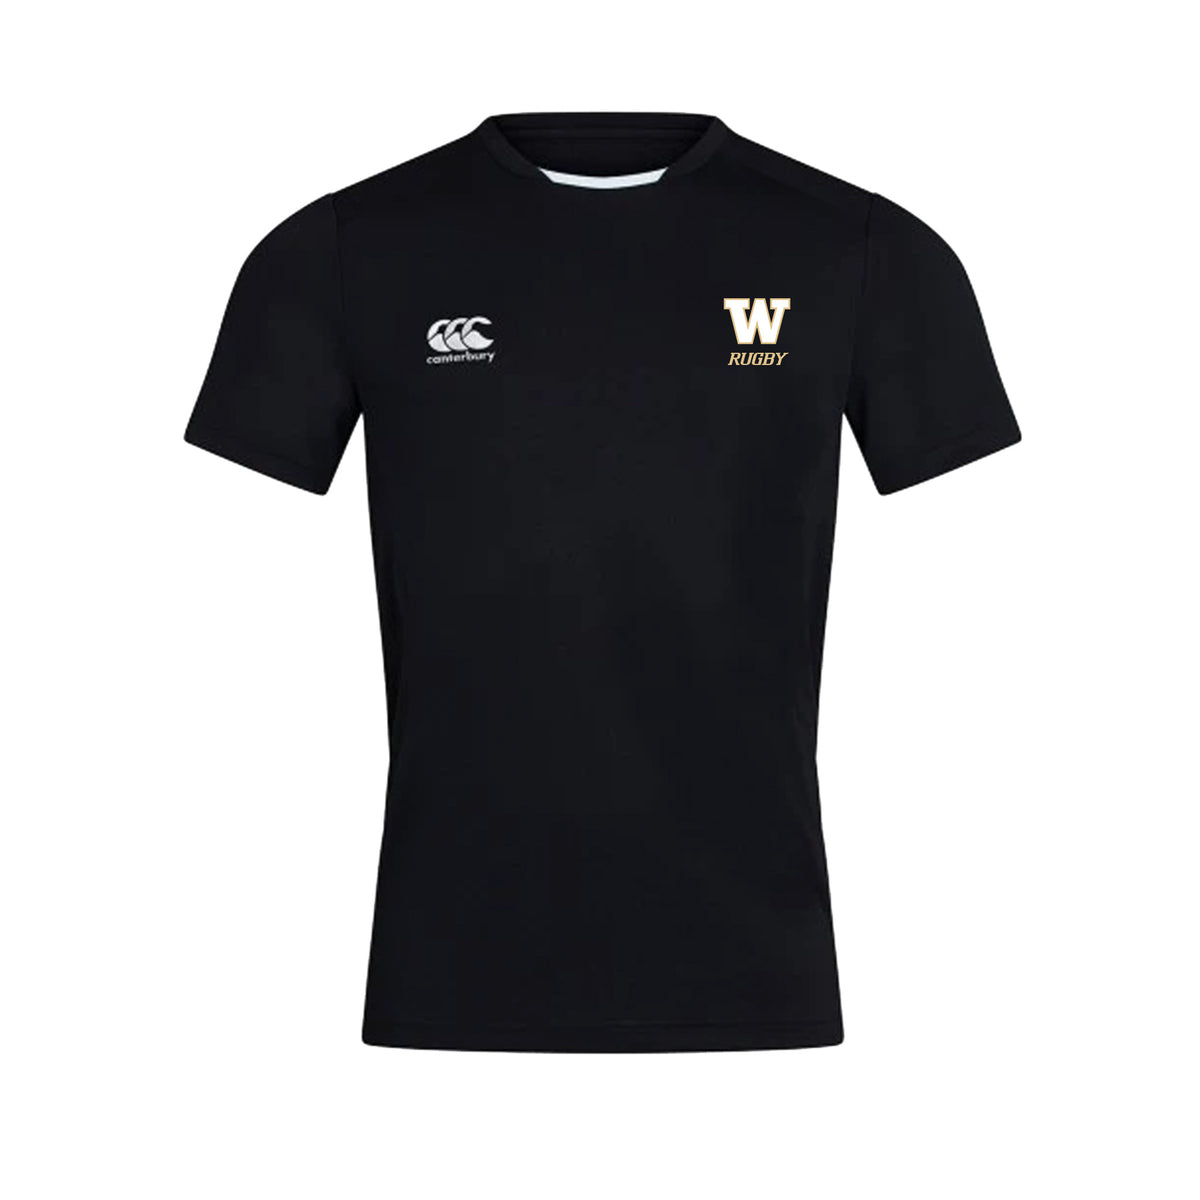 UW Women&#39;s Huskies Rugby Club Canterbury Club Dry T-Shirt - Mens - Black - The Rugby Shop The Rugby Shop Mens / BLACK / XS TRS Distribution Canada T-SHIRT UW Women&#39;s Huskies Rugby Club Canterbury Club Dry T-Shirt - Mens - Black